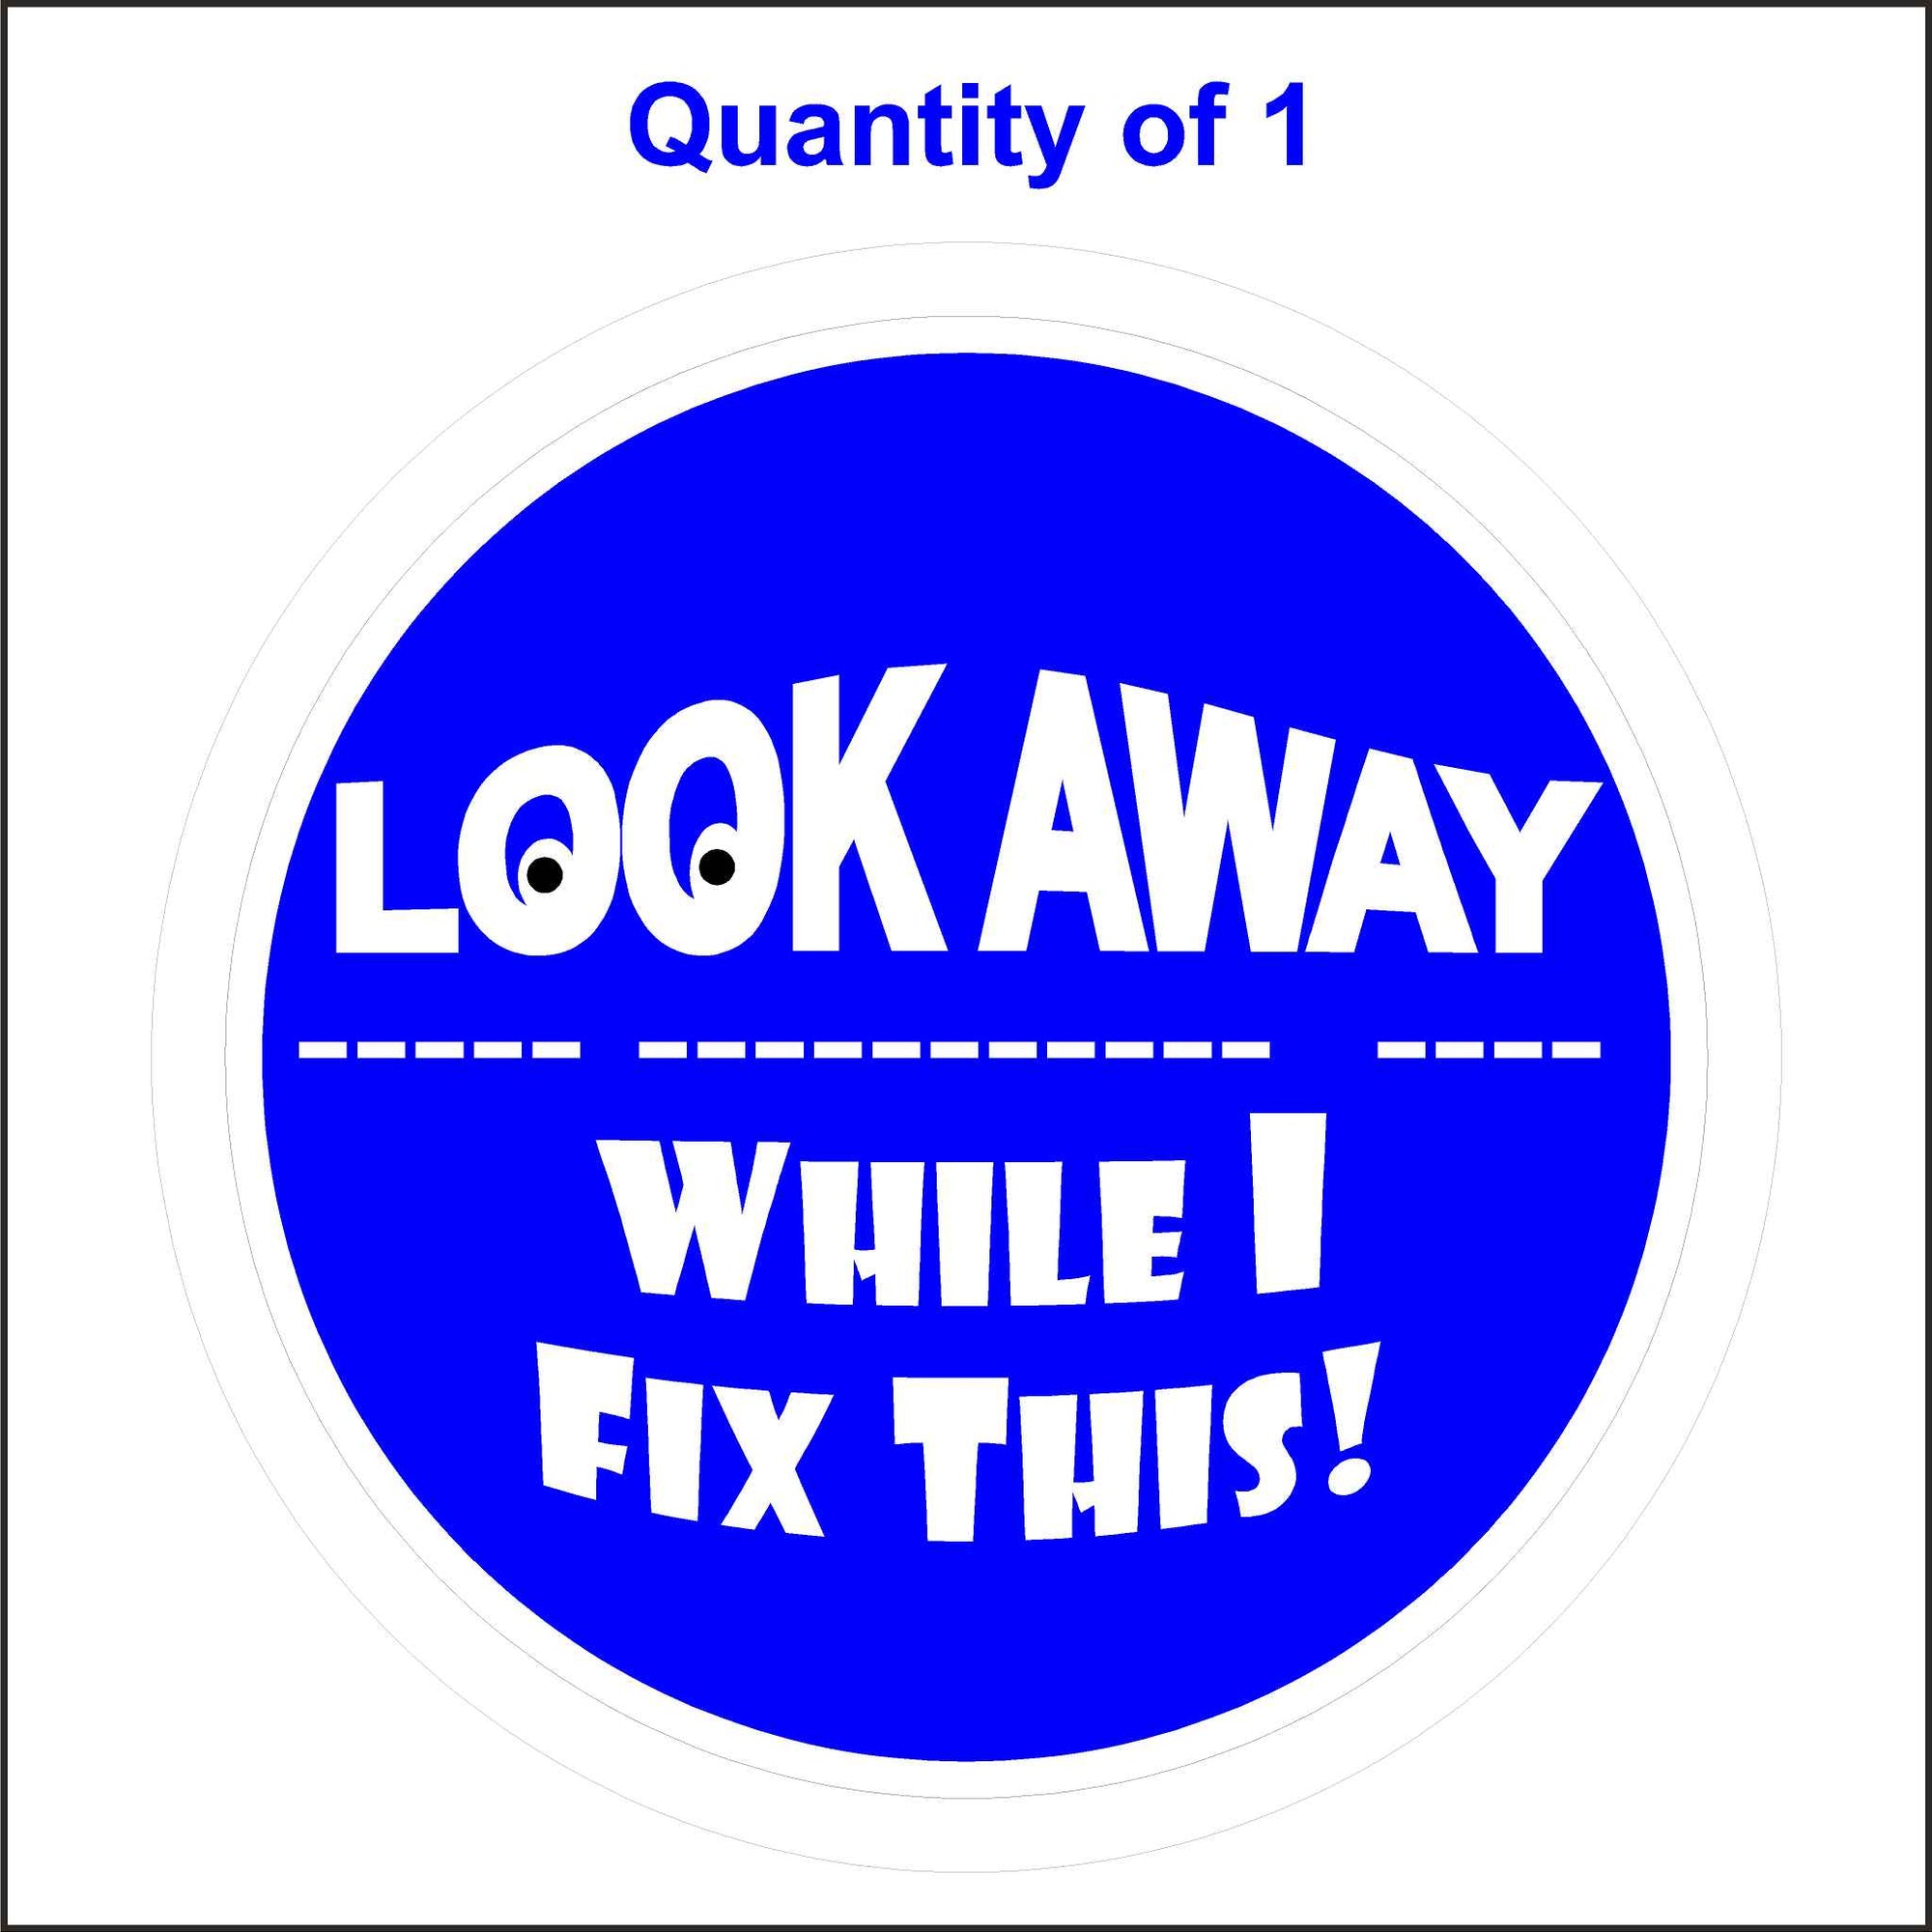 This Look Away While I Fix This Sticker Has a Blue Background With White Letters Saying, Look Away While I Fix This! The O’s in Look Are Eyeballs.